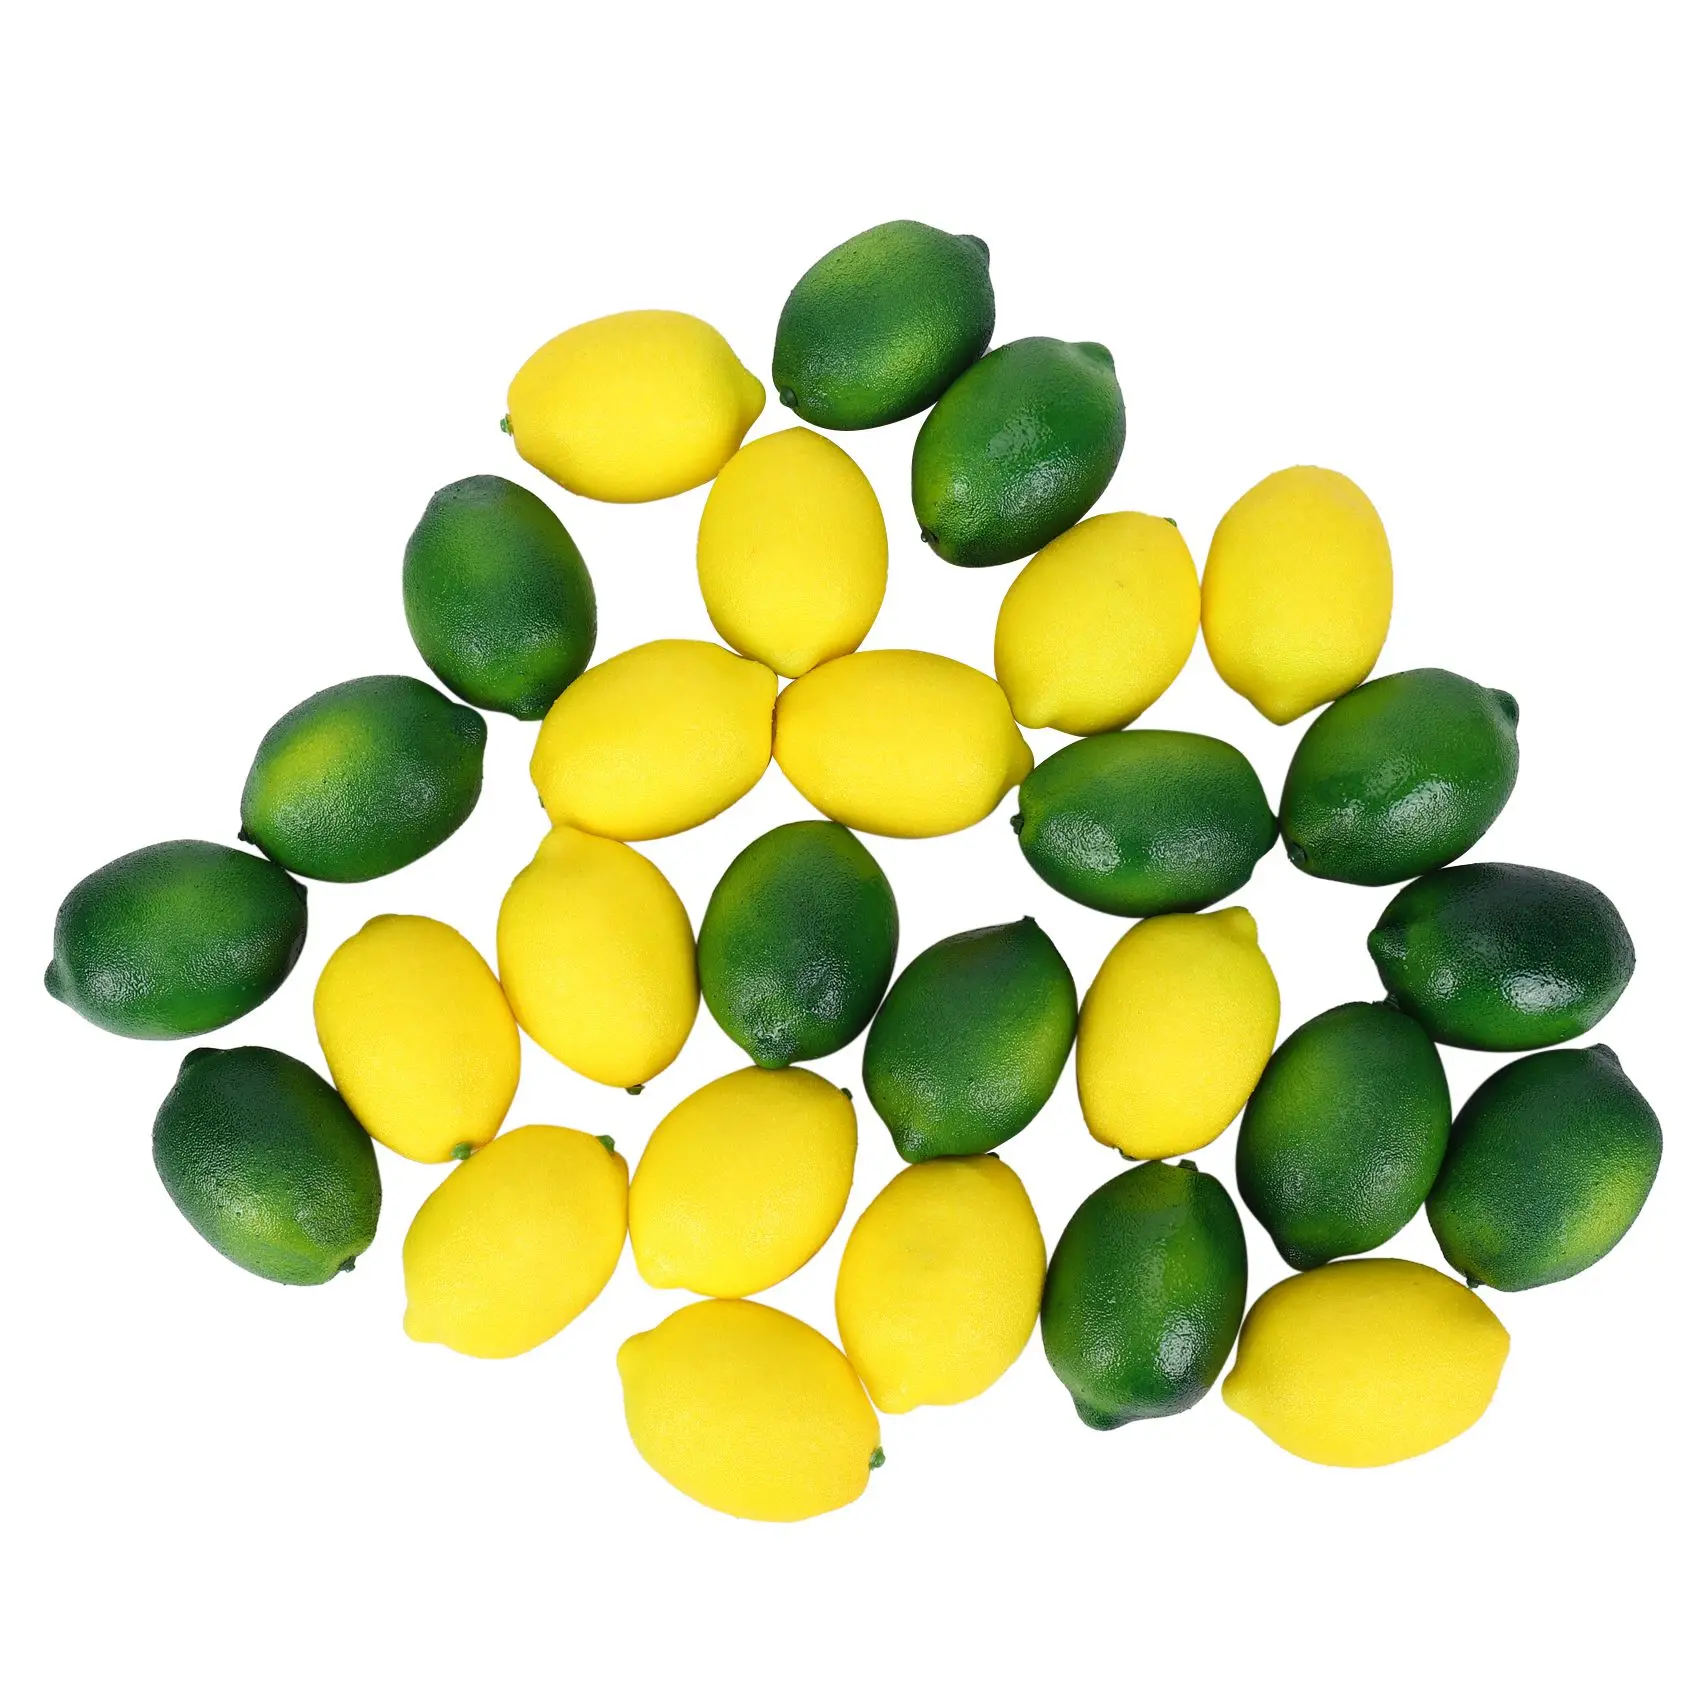 

28Pcs/Set Artificial Lemons and Limes Fake Fruits Decorative Faux Citrus Fruits Artificial Decorations for Home Kitchen